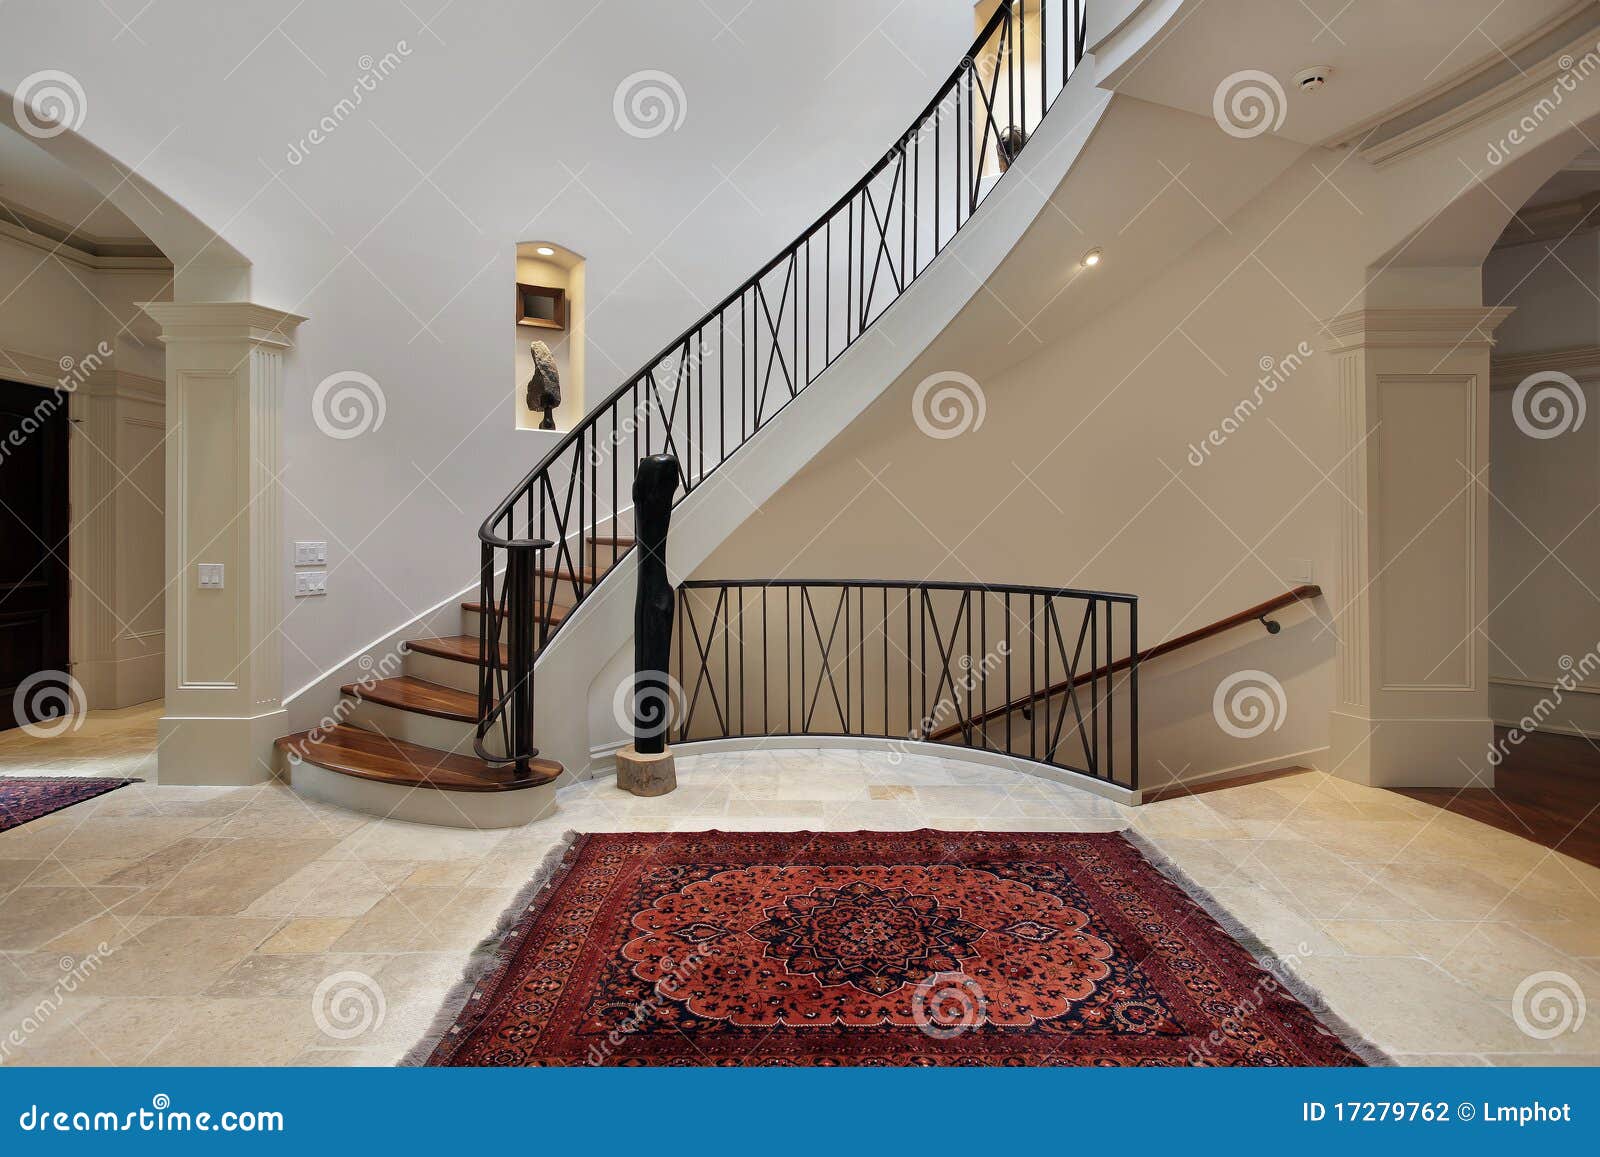 Large Foyer With Circular Staircase Stock Photography - Image ...